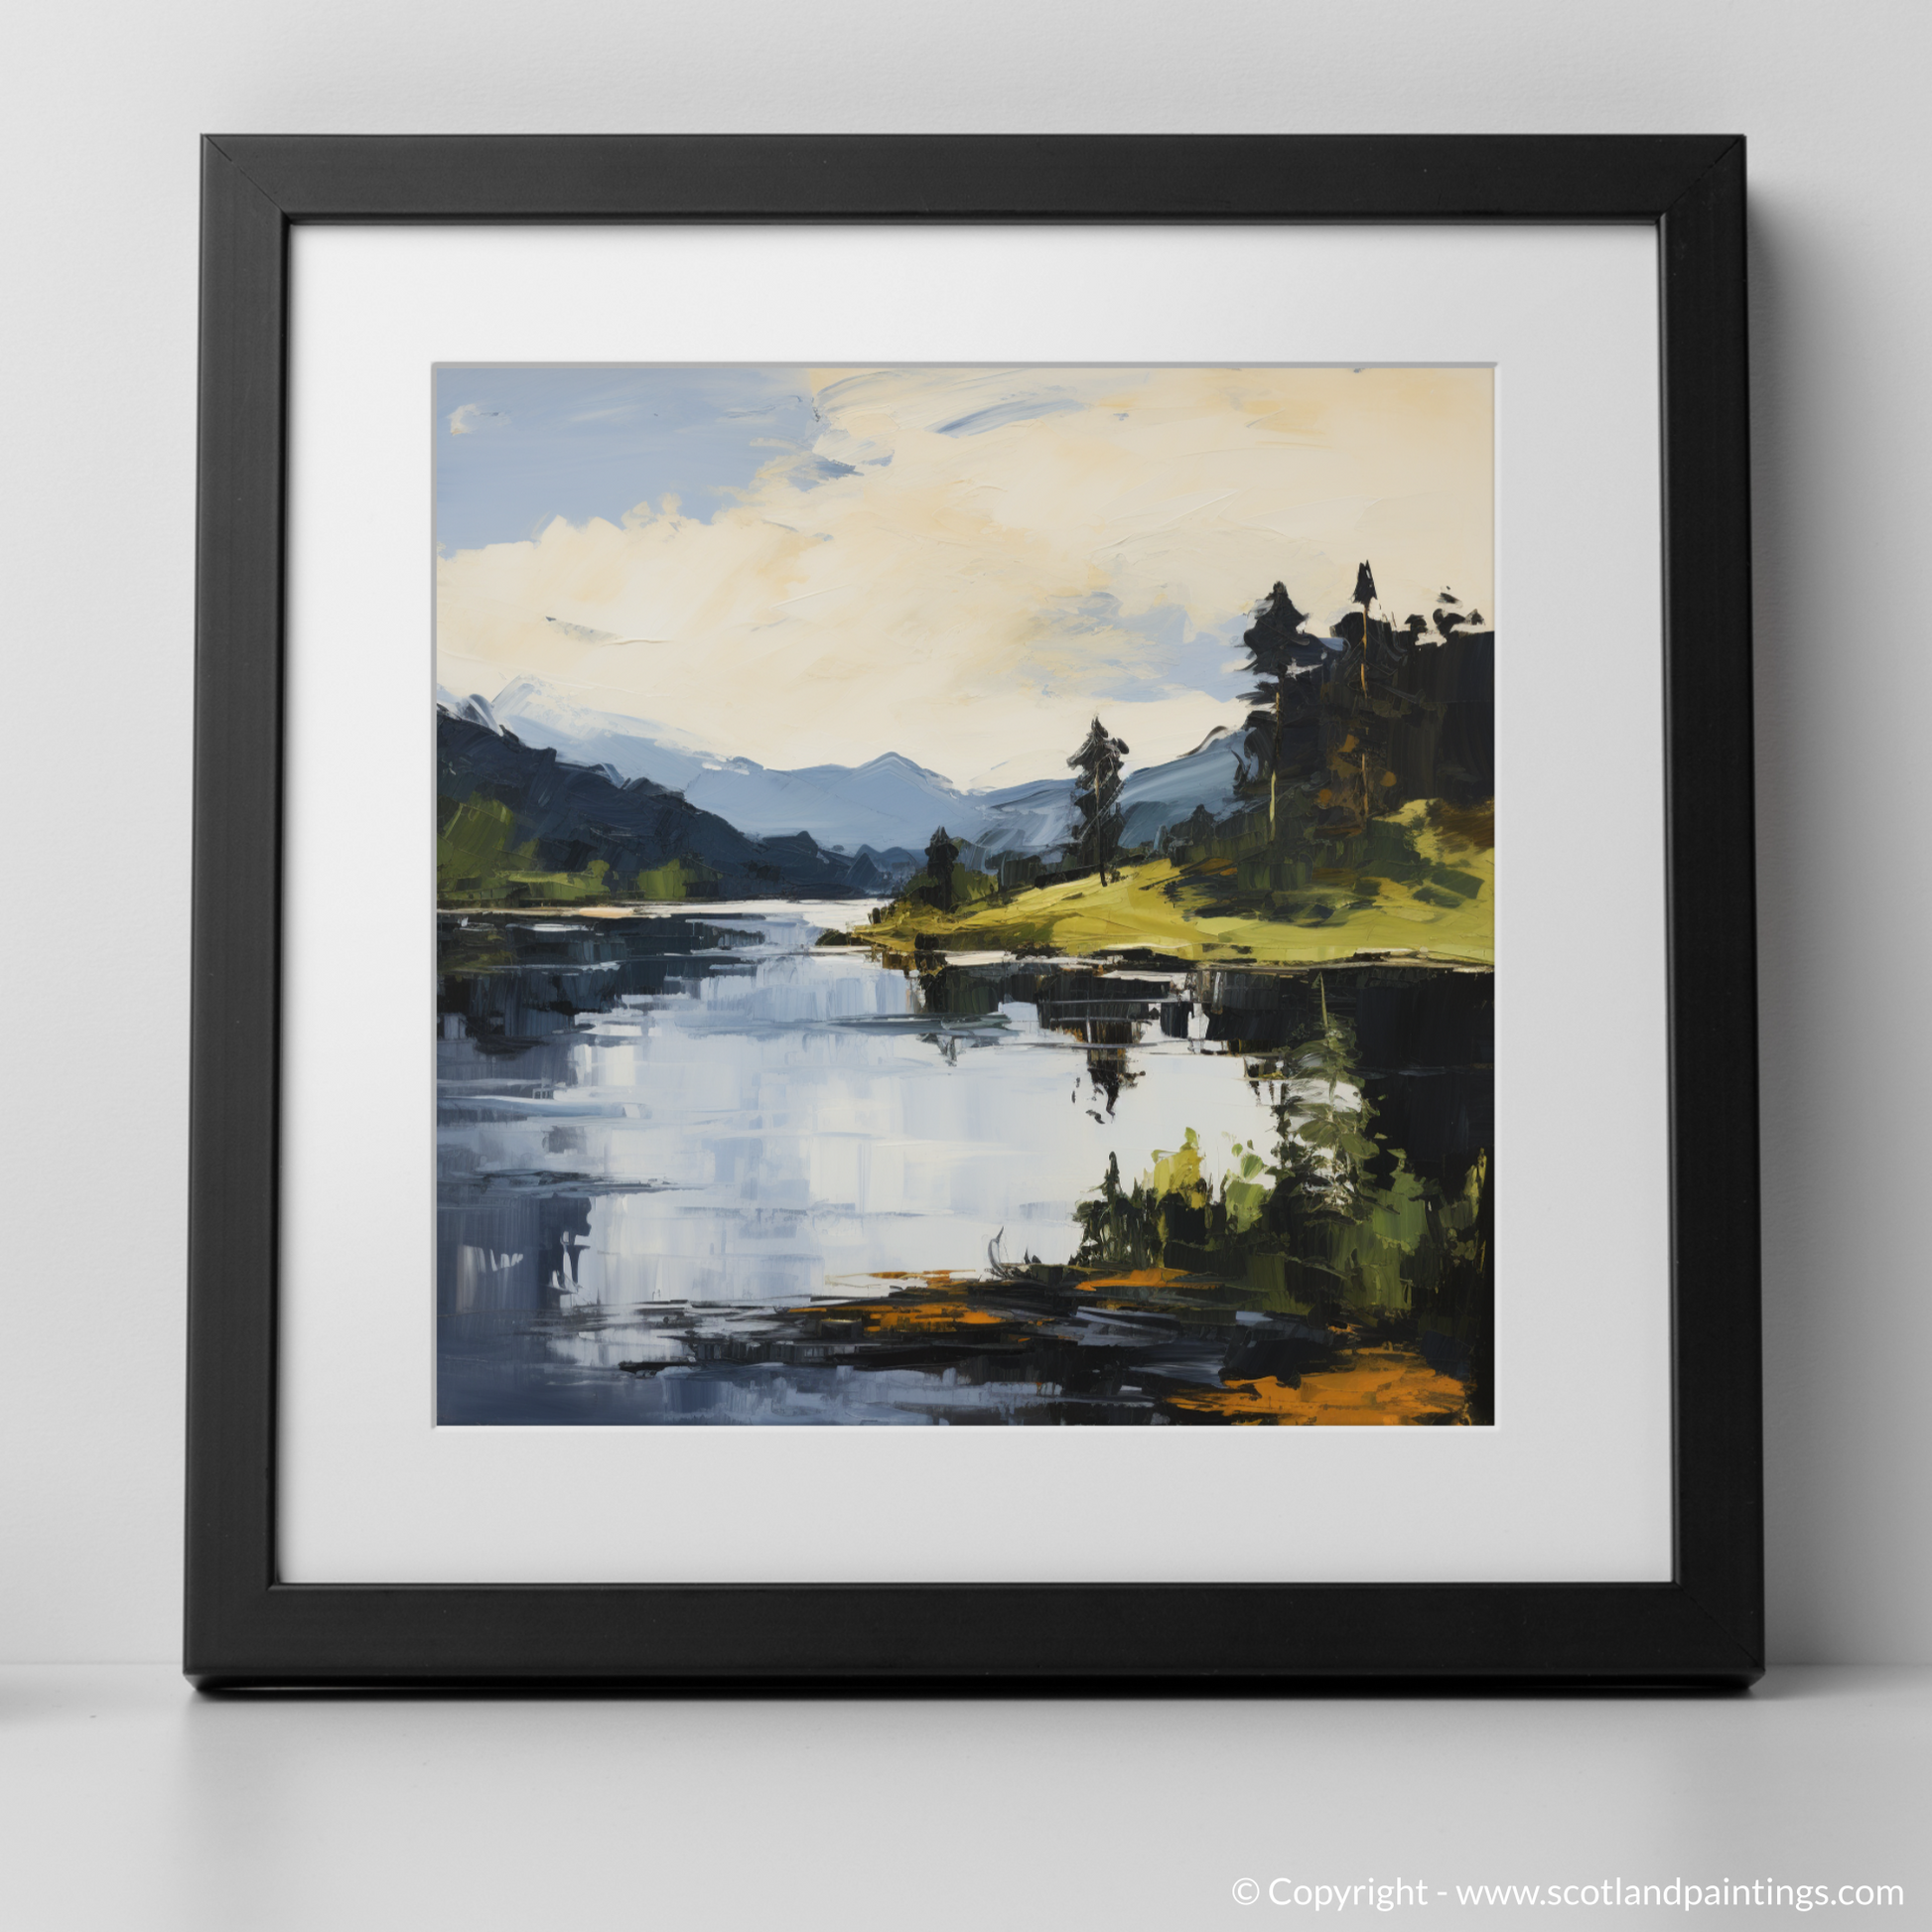 Art Print of Loch Ard, Stirling in summer with a black frame